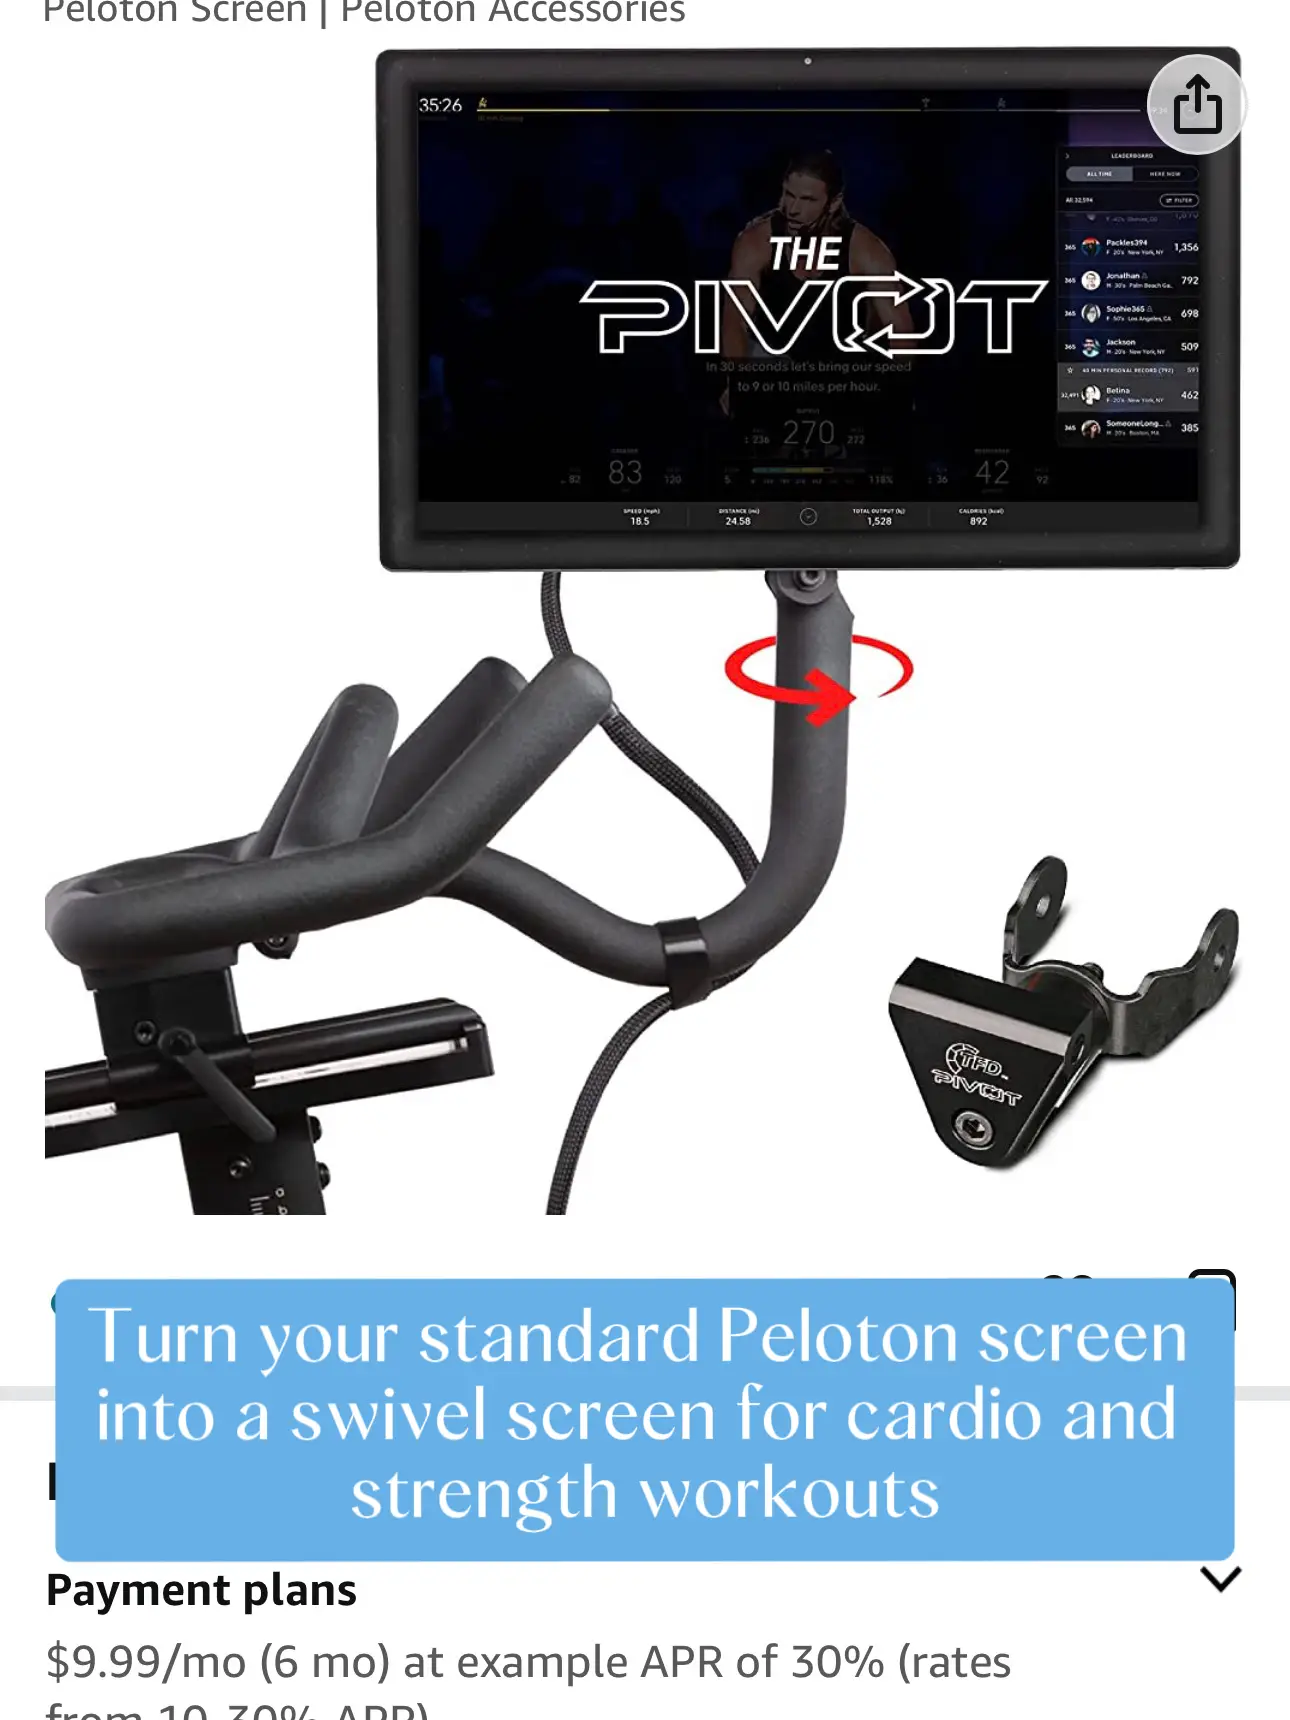 Peloton Adds New Accessories to Barre & Pilates Classes (Mini Bands,  Slides, Pilates Ring Circle & more) - Peloton Buddy